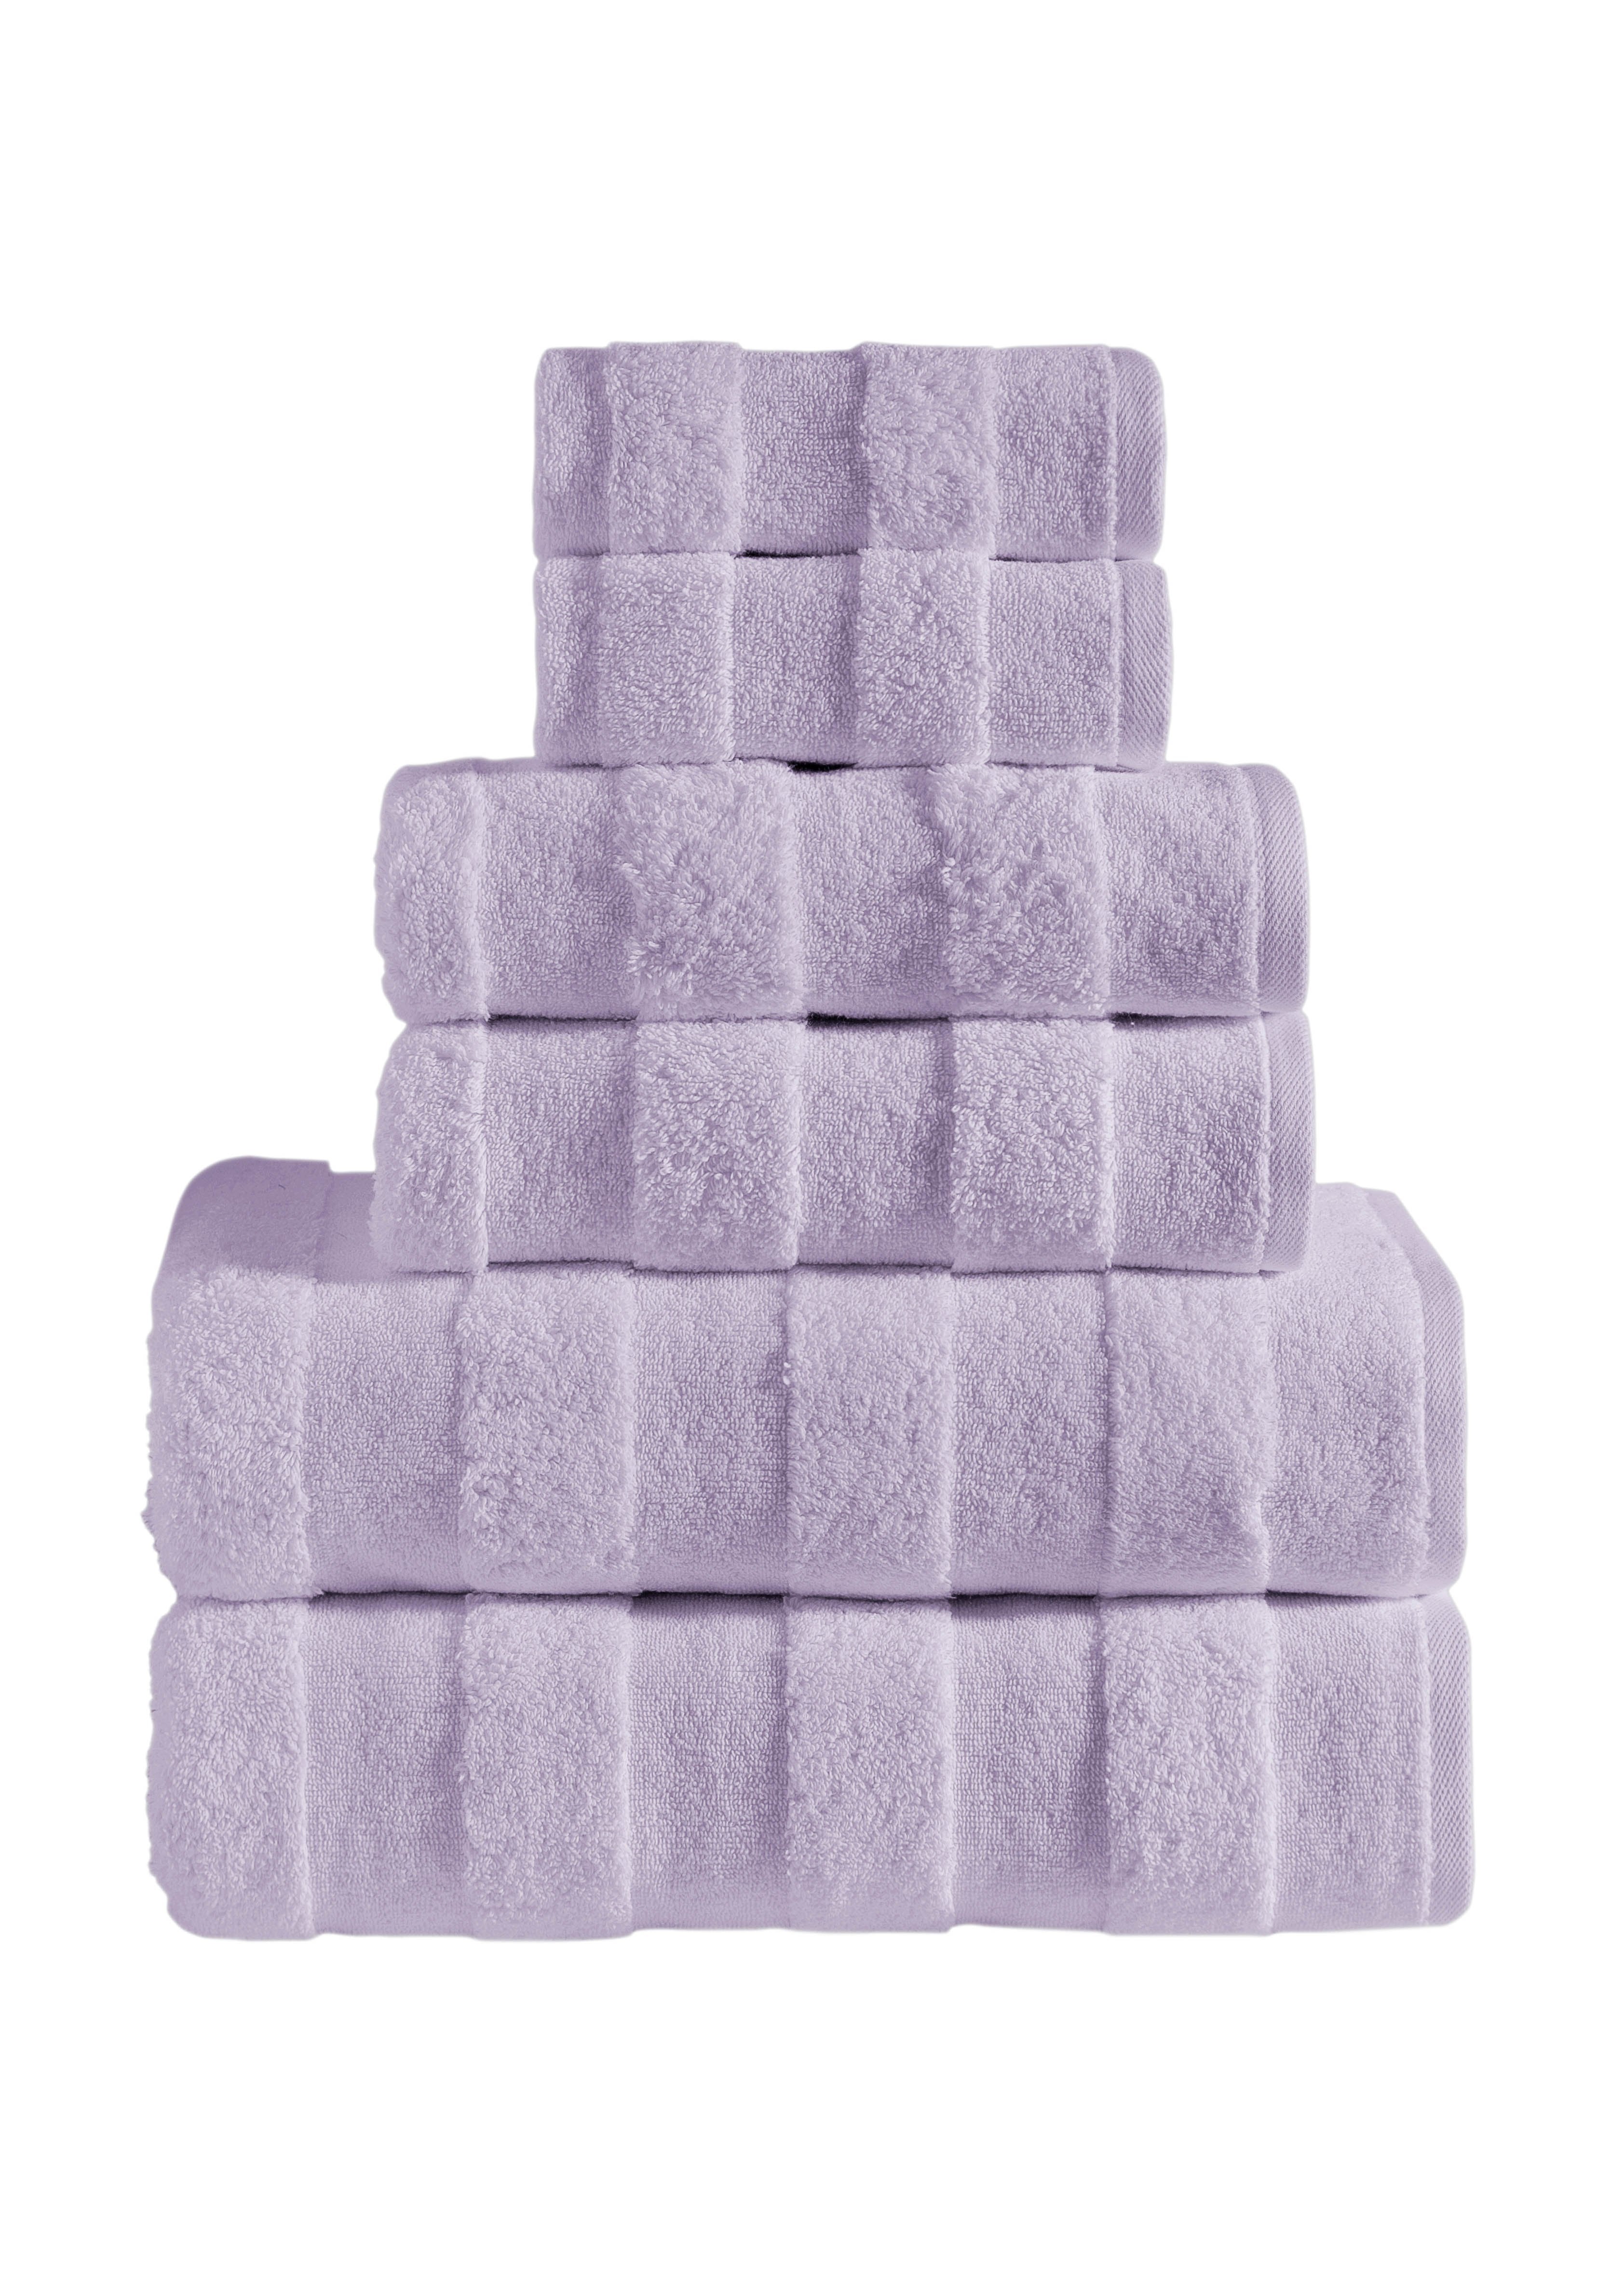 Apogee Collection 6 PK Towels Set - Orchid  